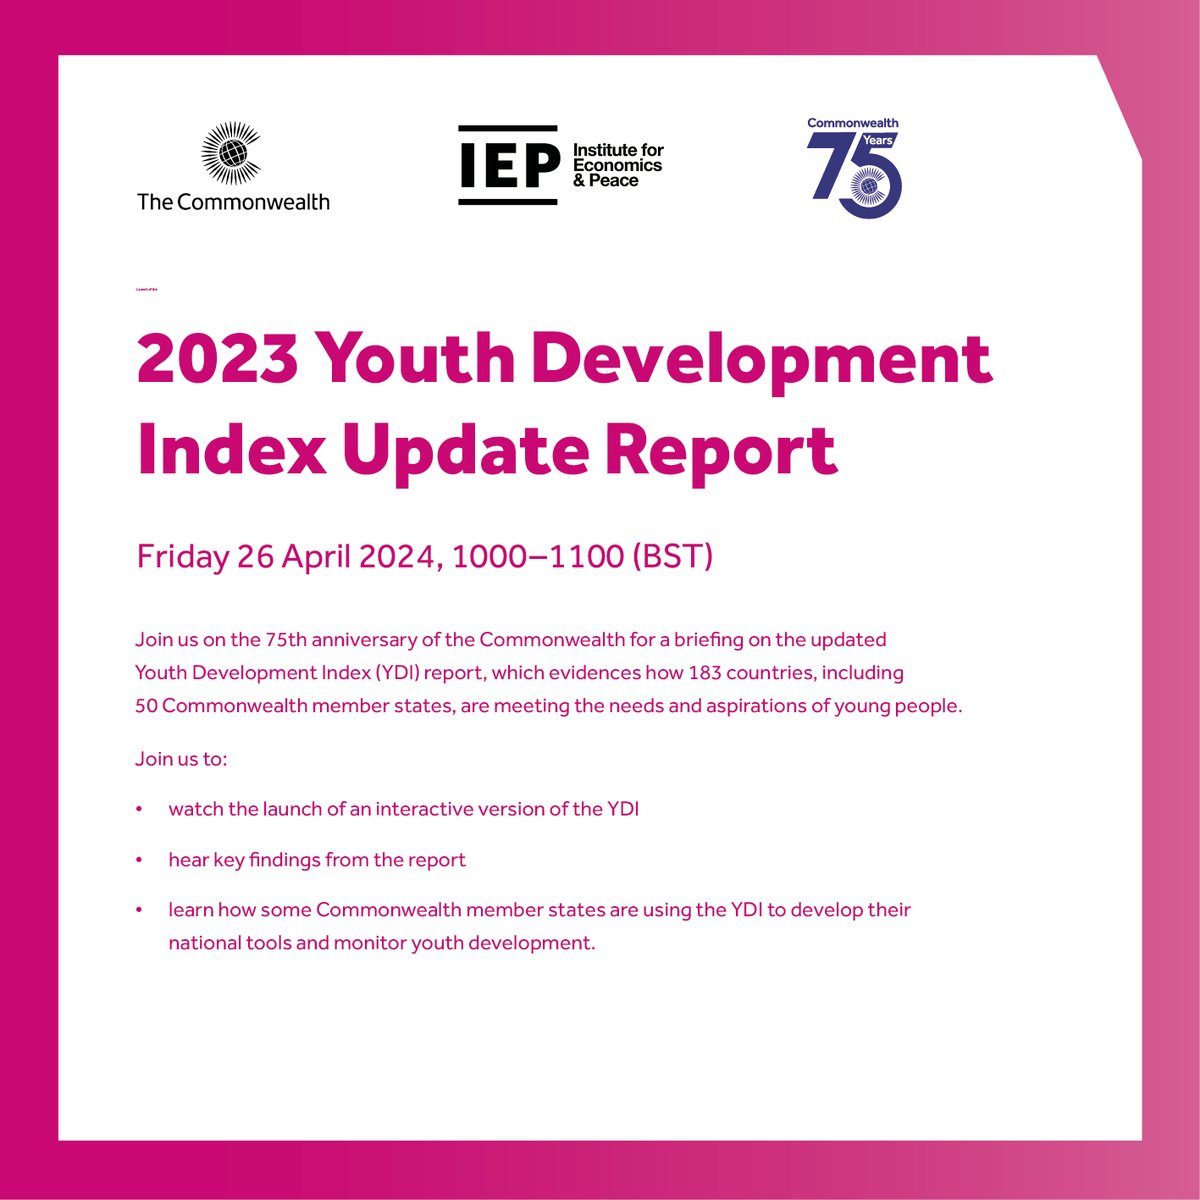 📢 Join us this Friday at 10am BST for the launch of the 2023 Youth Development Index Update Report. 📈The #YDI looks at the state of health and wellbeing, education, employment and more for young people in 183 countries. Register now: thecommonwealth.org/events/launch-…